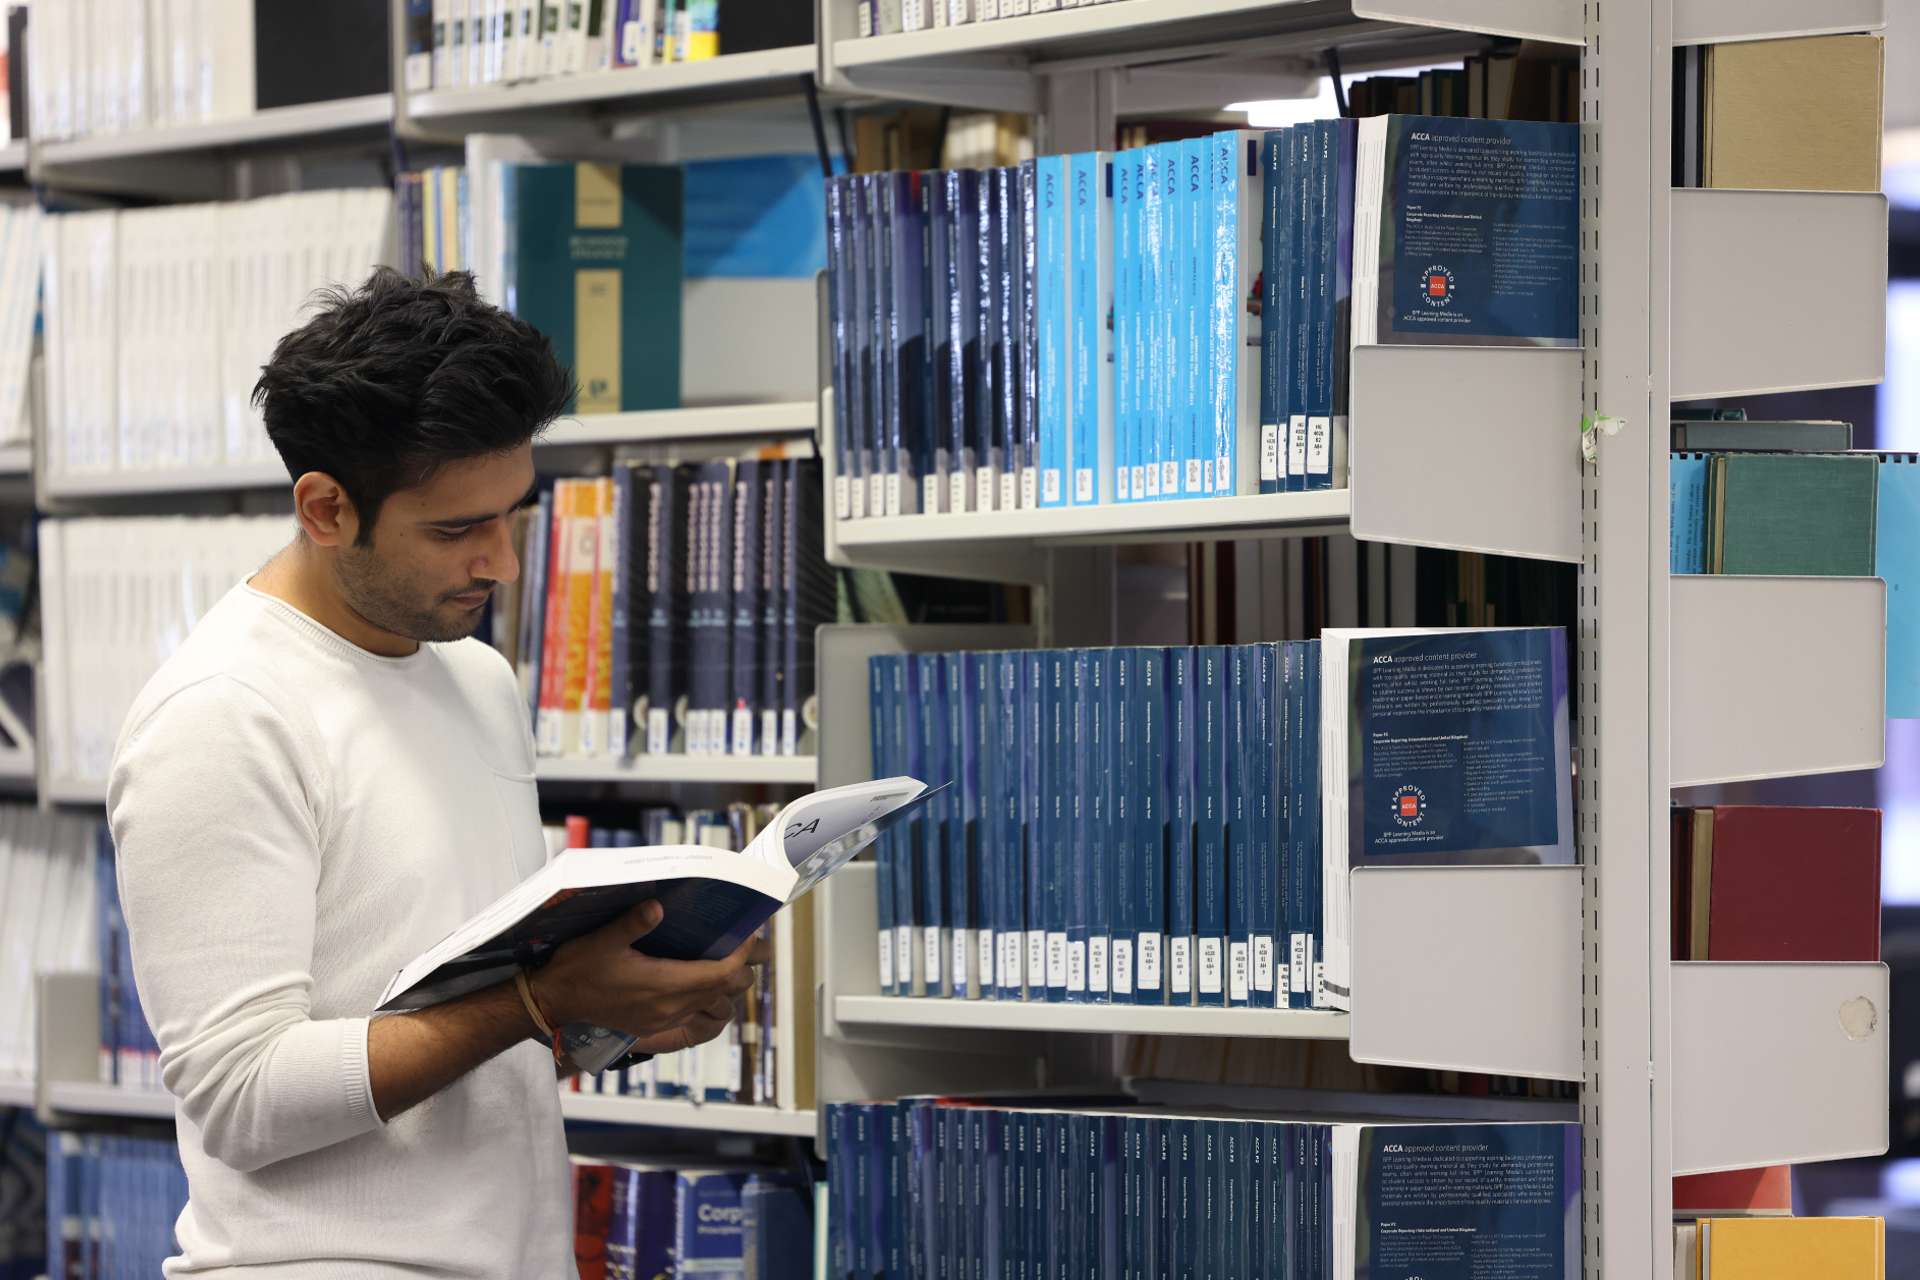 A postgraduate student standing in the library, reading a book.